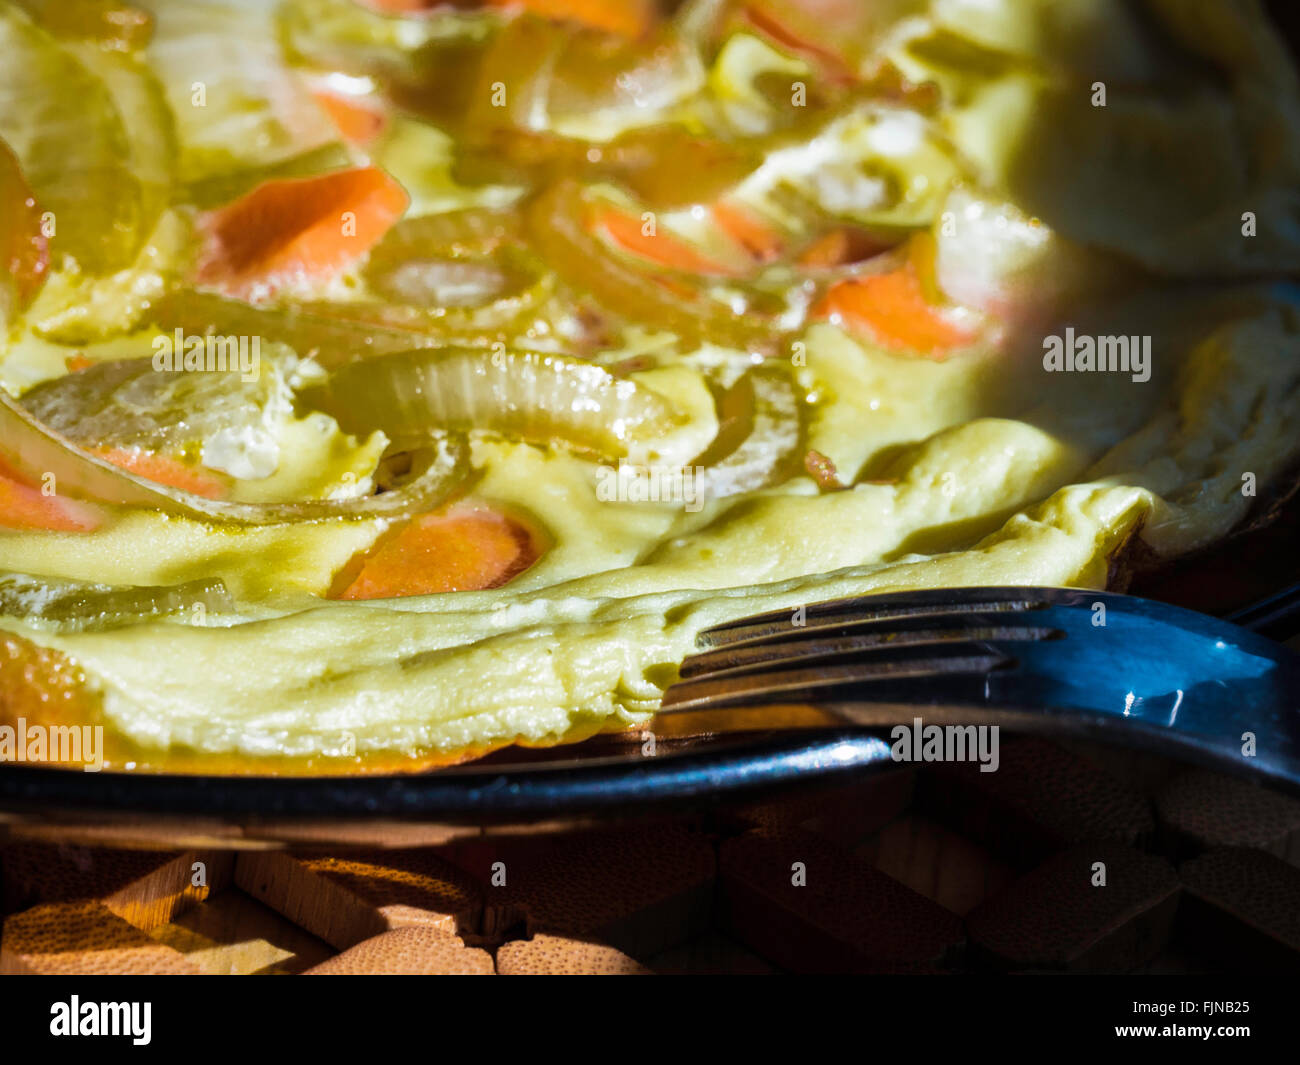 Close-Up Of Cooked Dish With Onion Ready To Eat, Metal Fork In Foreground Stock Photo